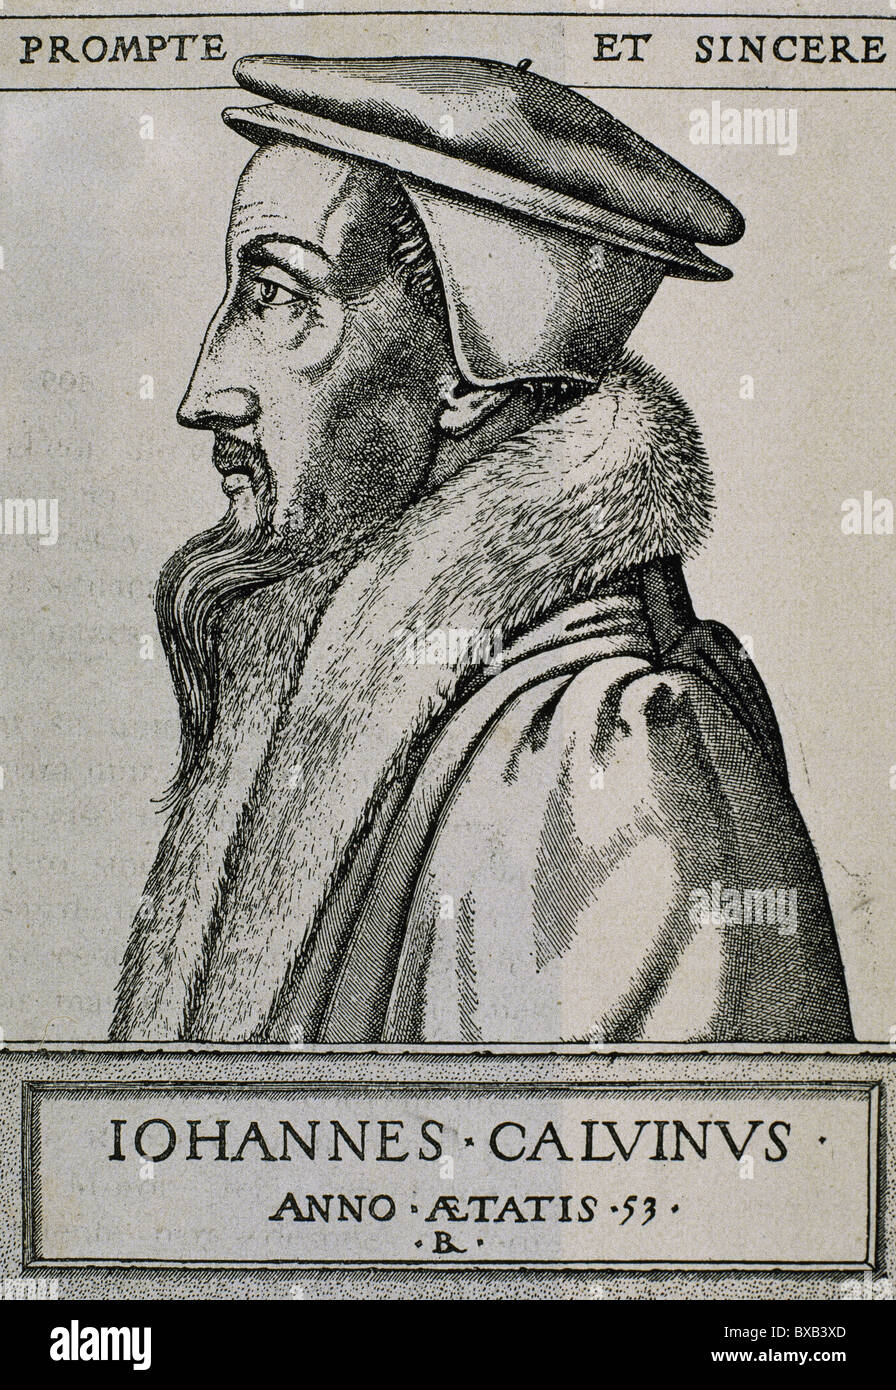 John Calvin (1509–1564). French theologian and pastor during the Protestant Reformation. Engraving. Stock Photo